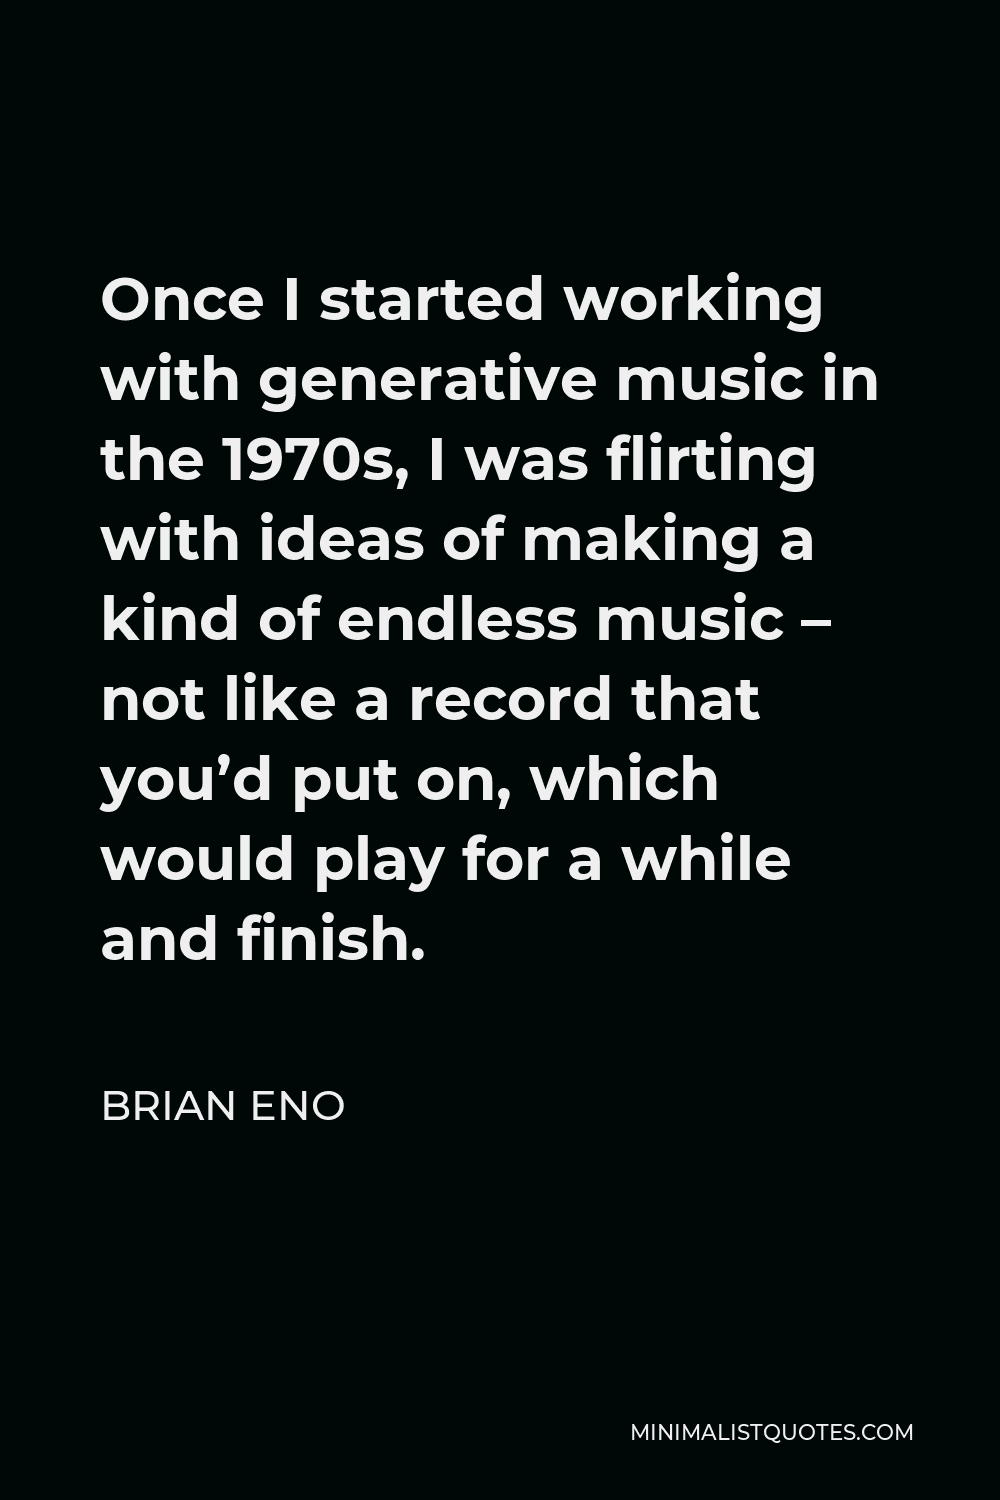 Brian Eno Quote - Once I started working with generative music in the 1970s, I was flirting with ideas of making a kind of endless music – not like a record that you’d put on, which would play for a while and finish.